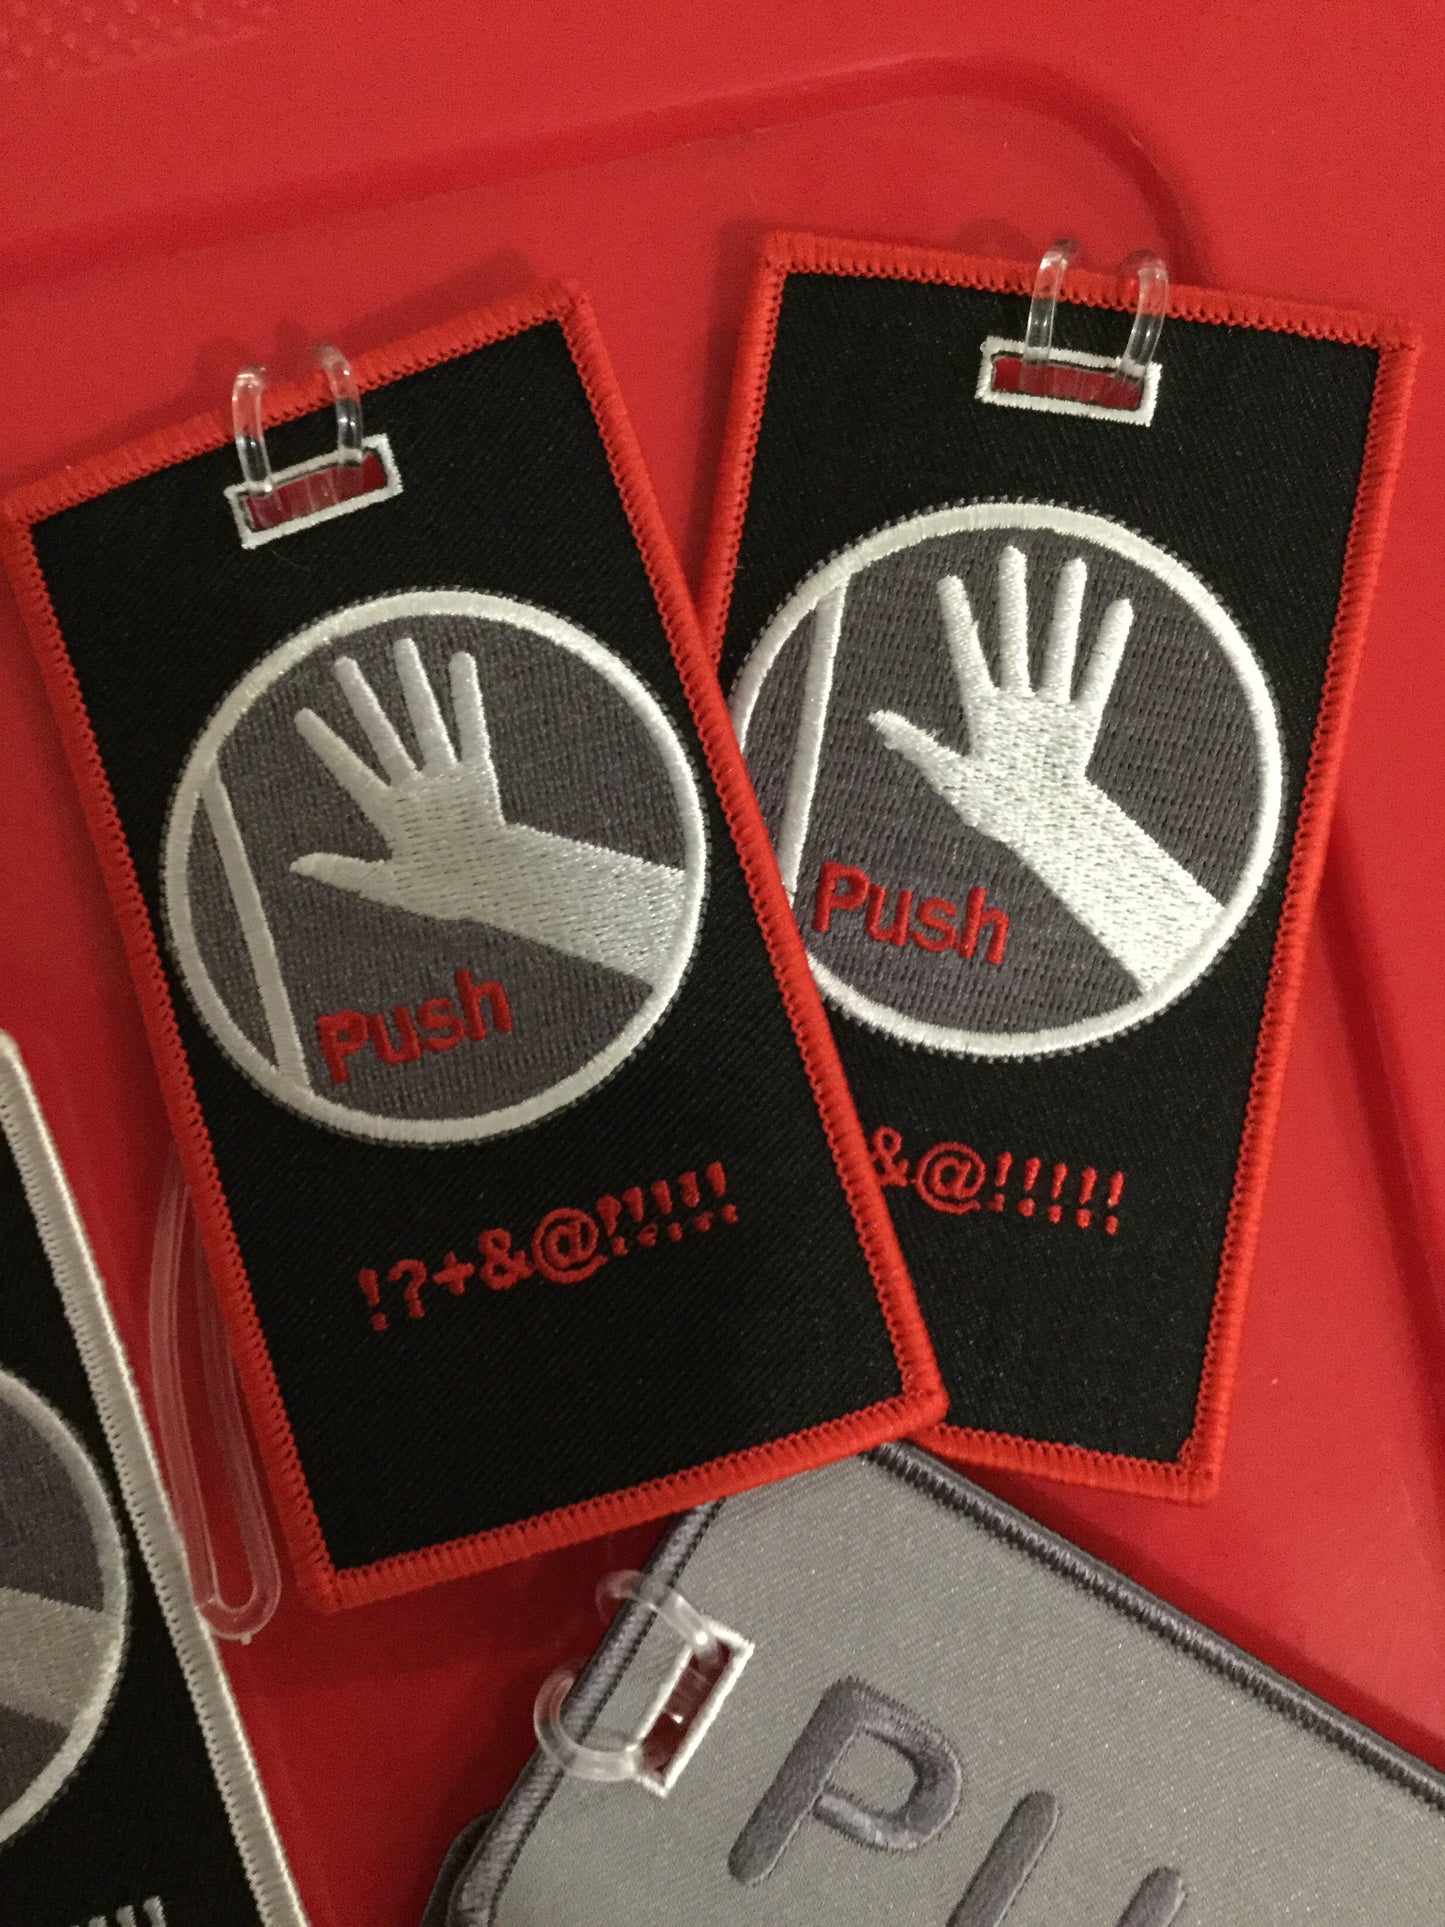 Push!  #$@&!!!! The ..door!  Black and Gray Luggage Tag